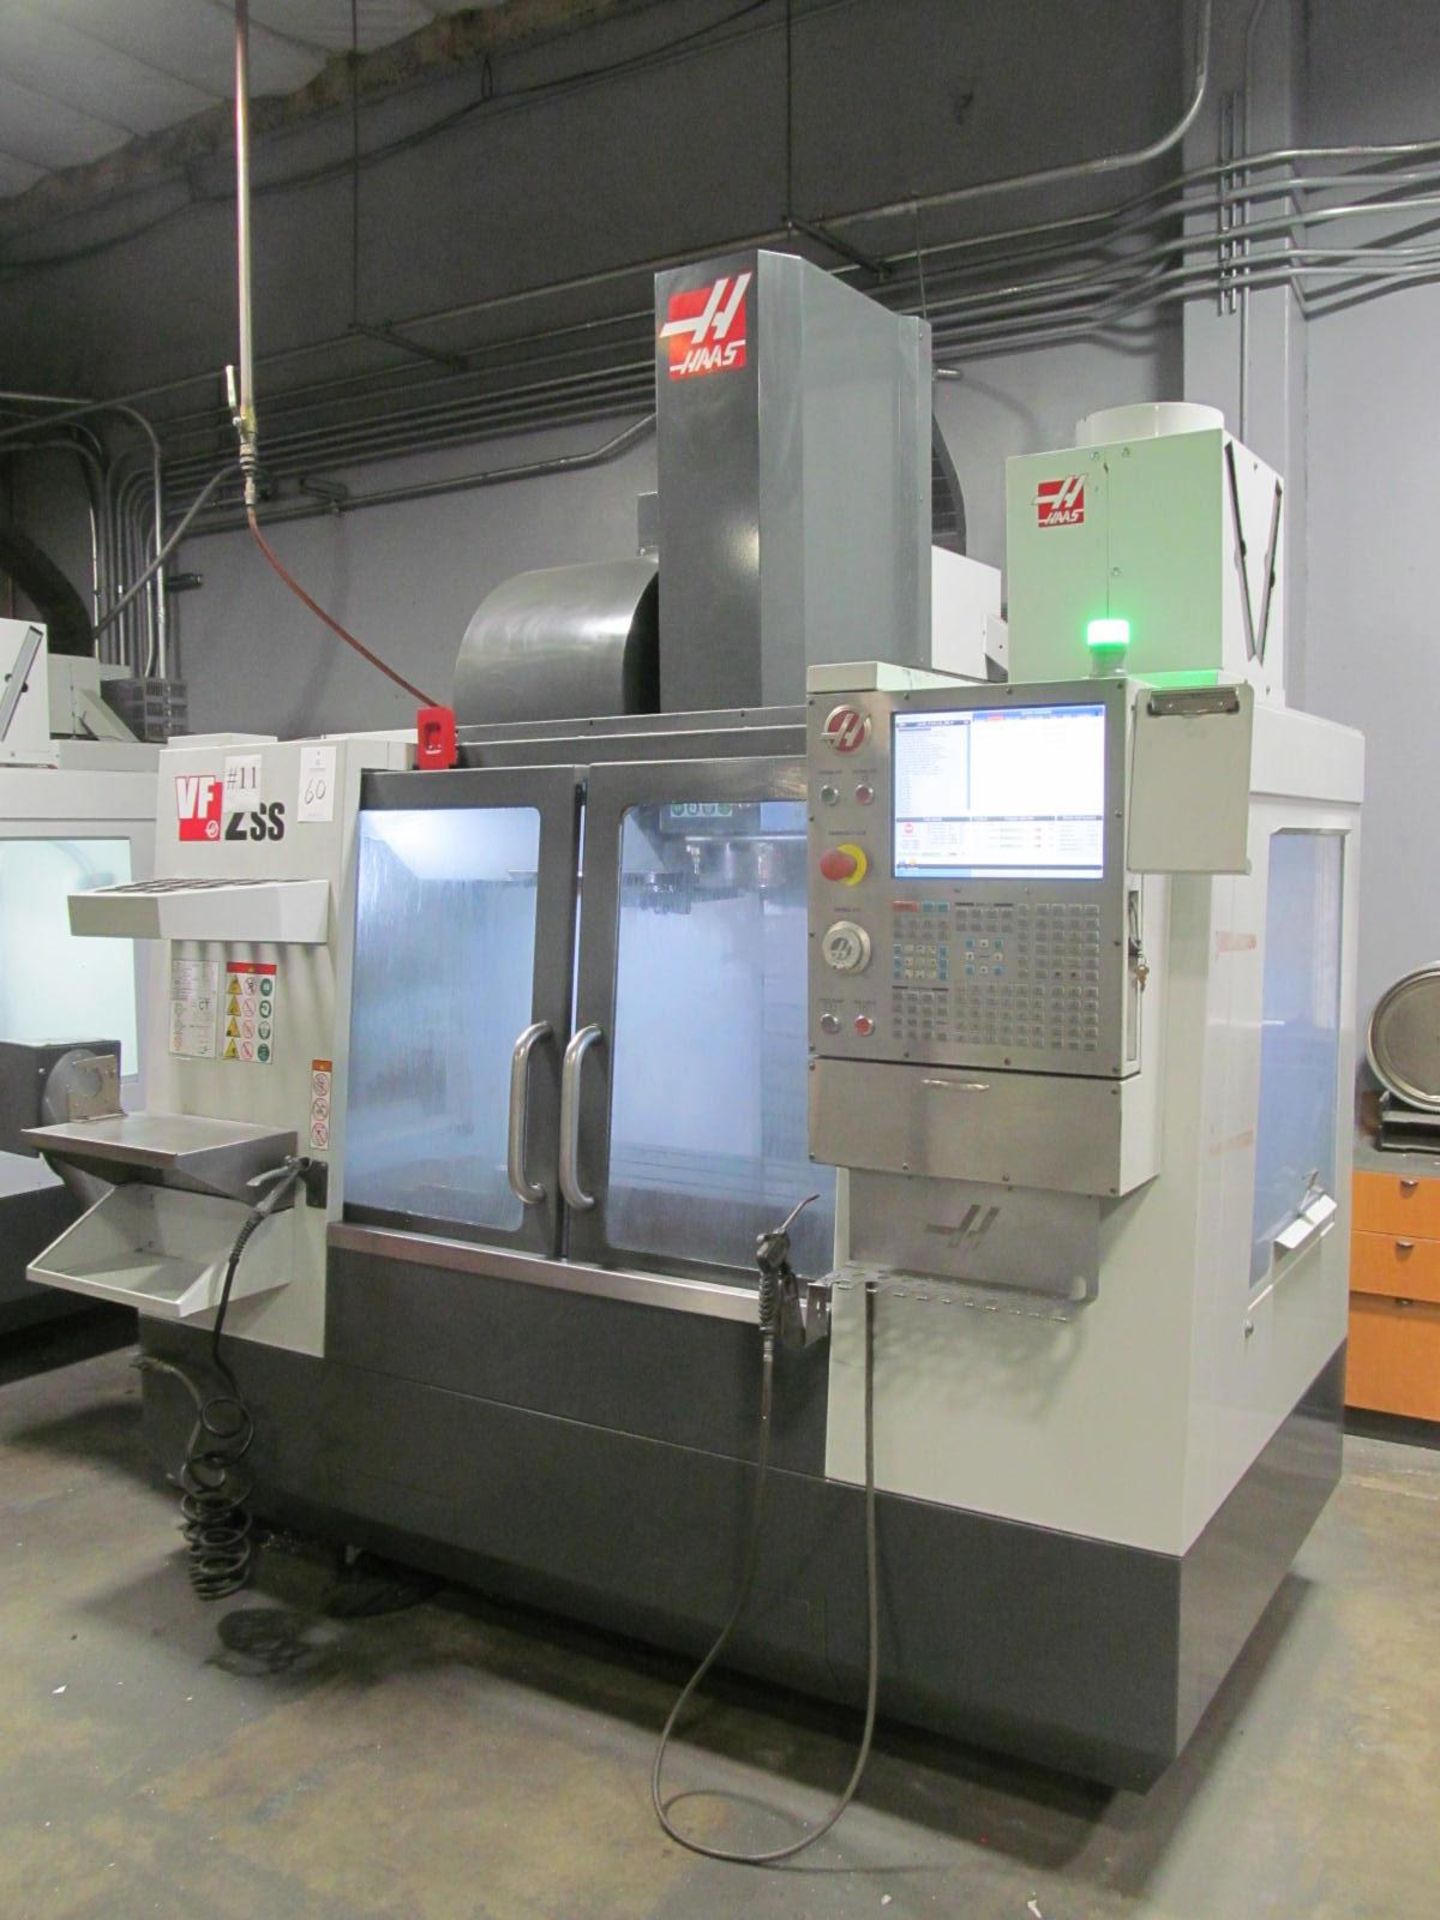 Haas VF-2SS CNC Vertical Machining Center - Image 3 of 9